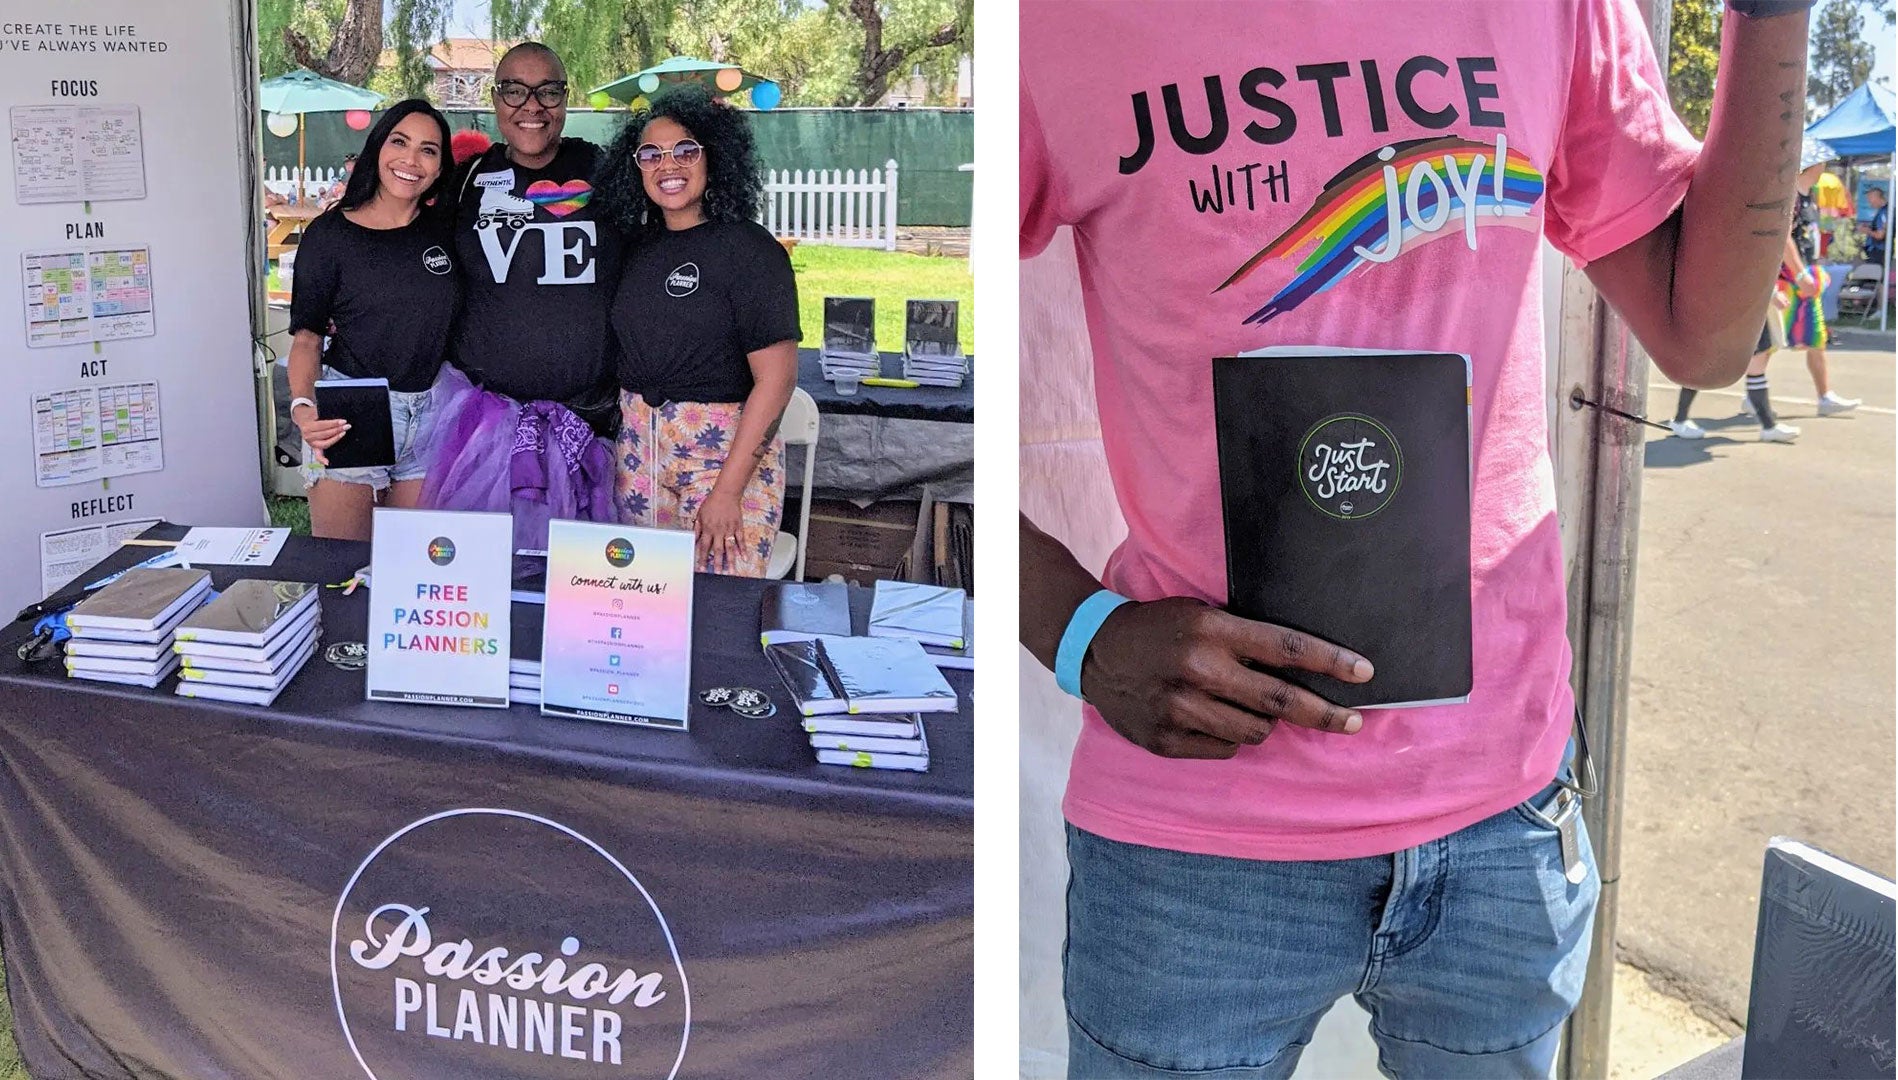 Photos of Passion Planner at San Diego Pride 2022